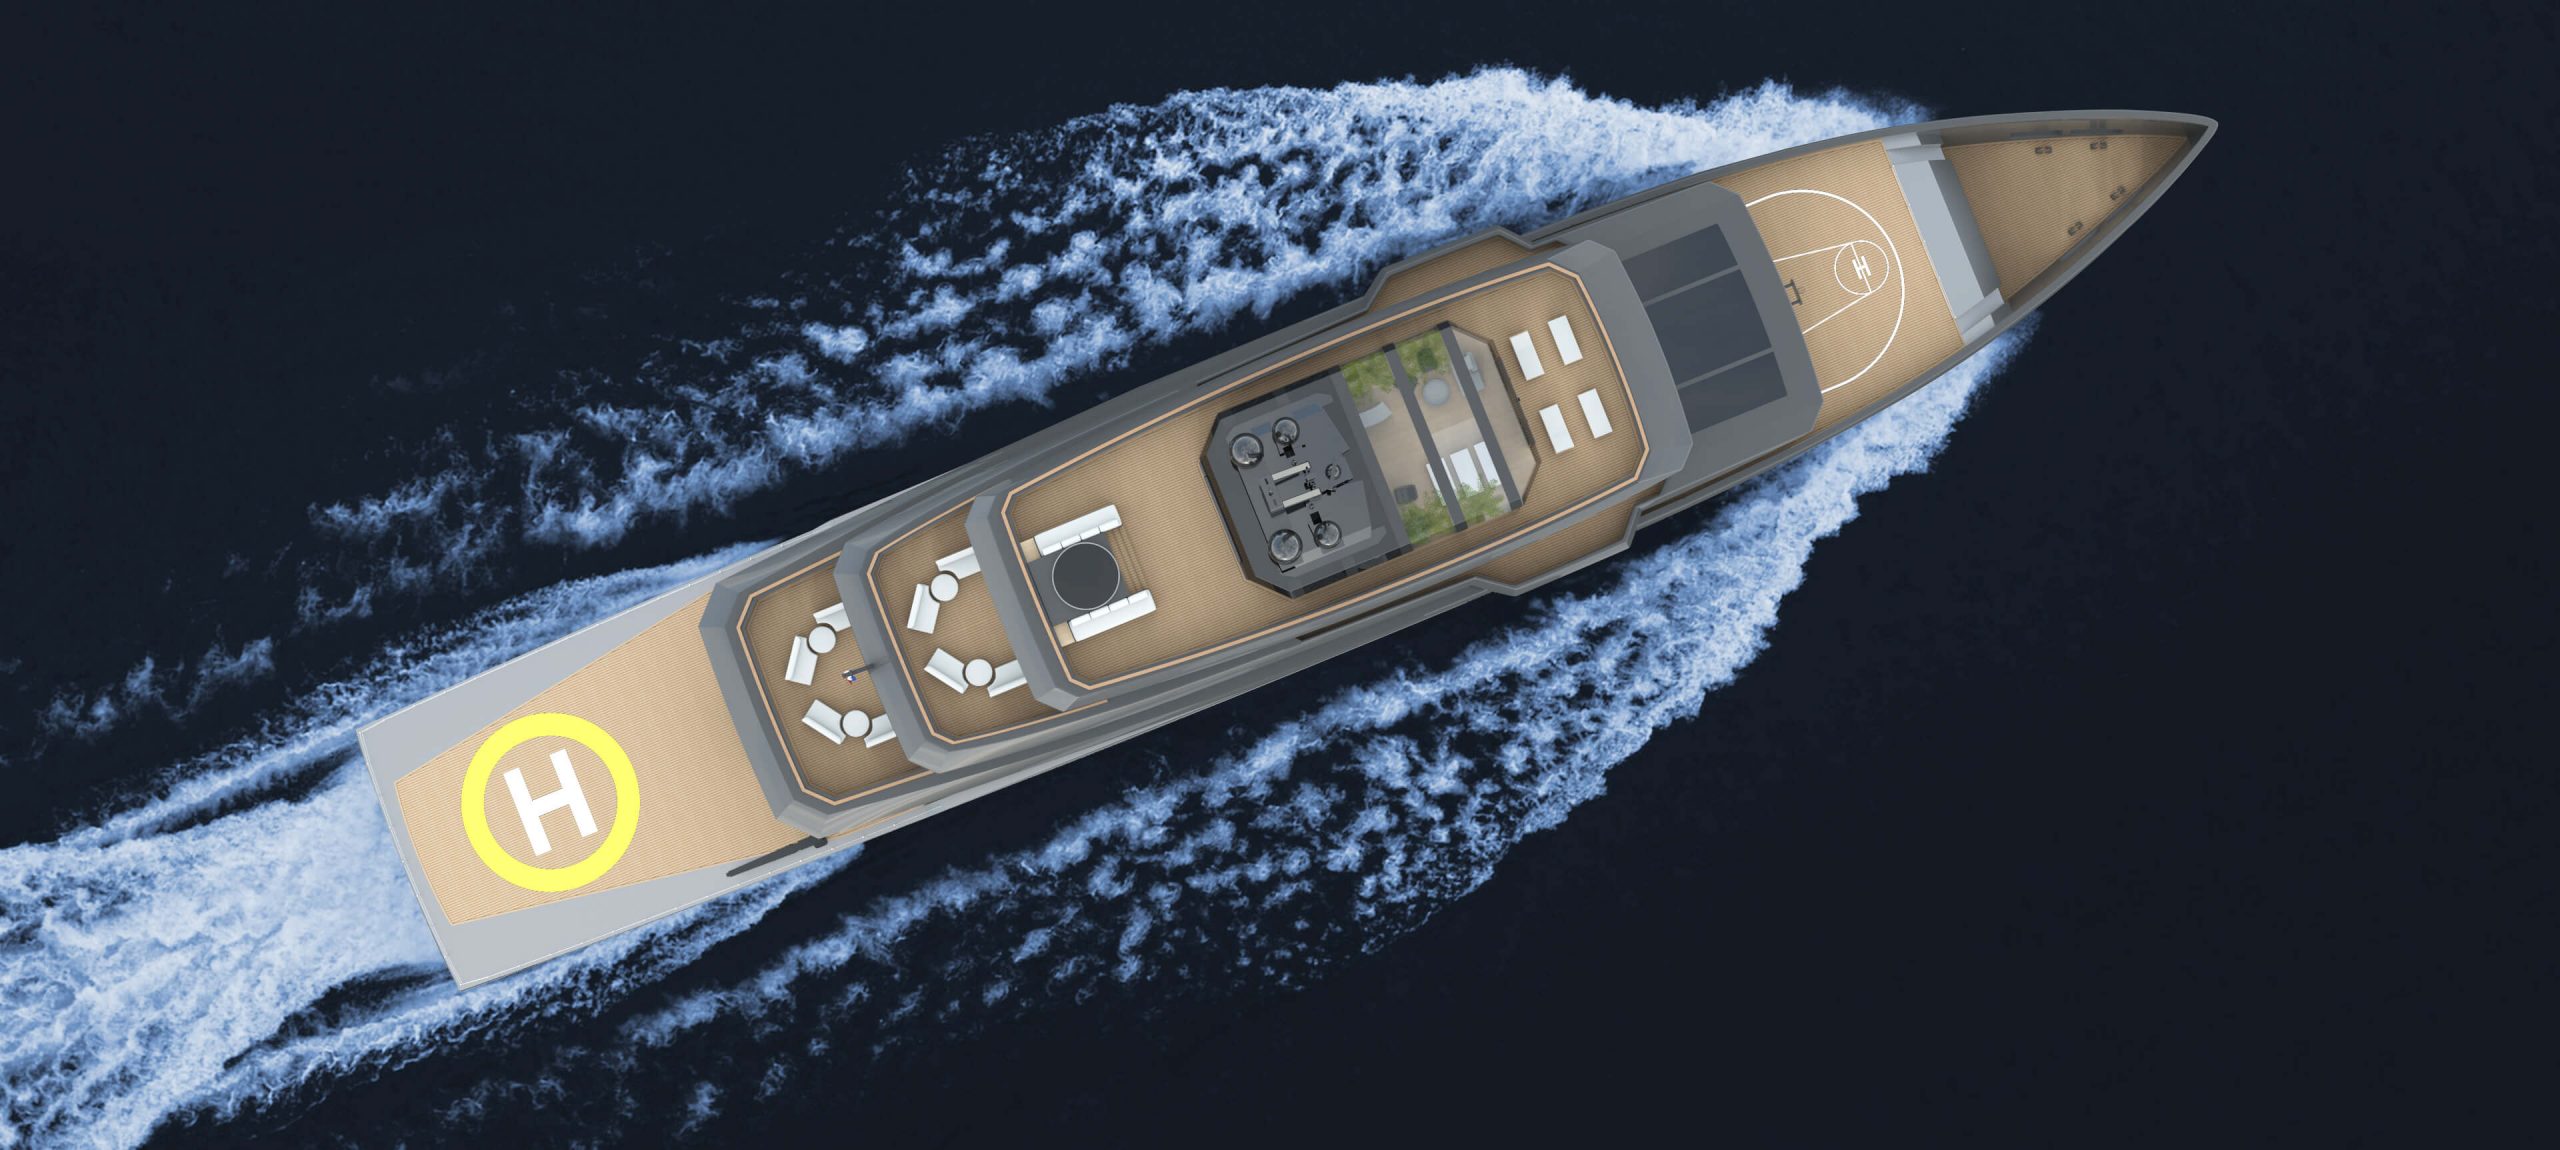 top down view of a yacht render made by yacht designer